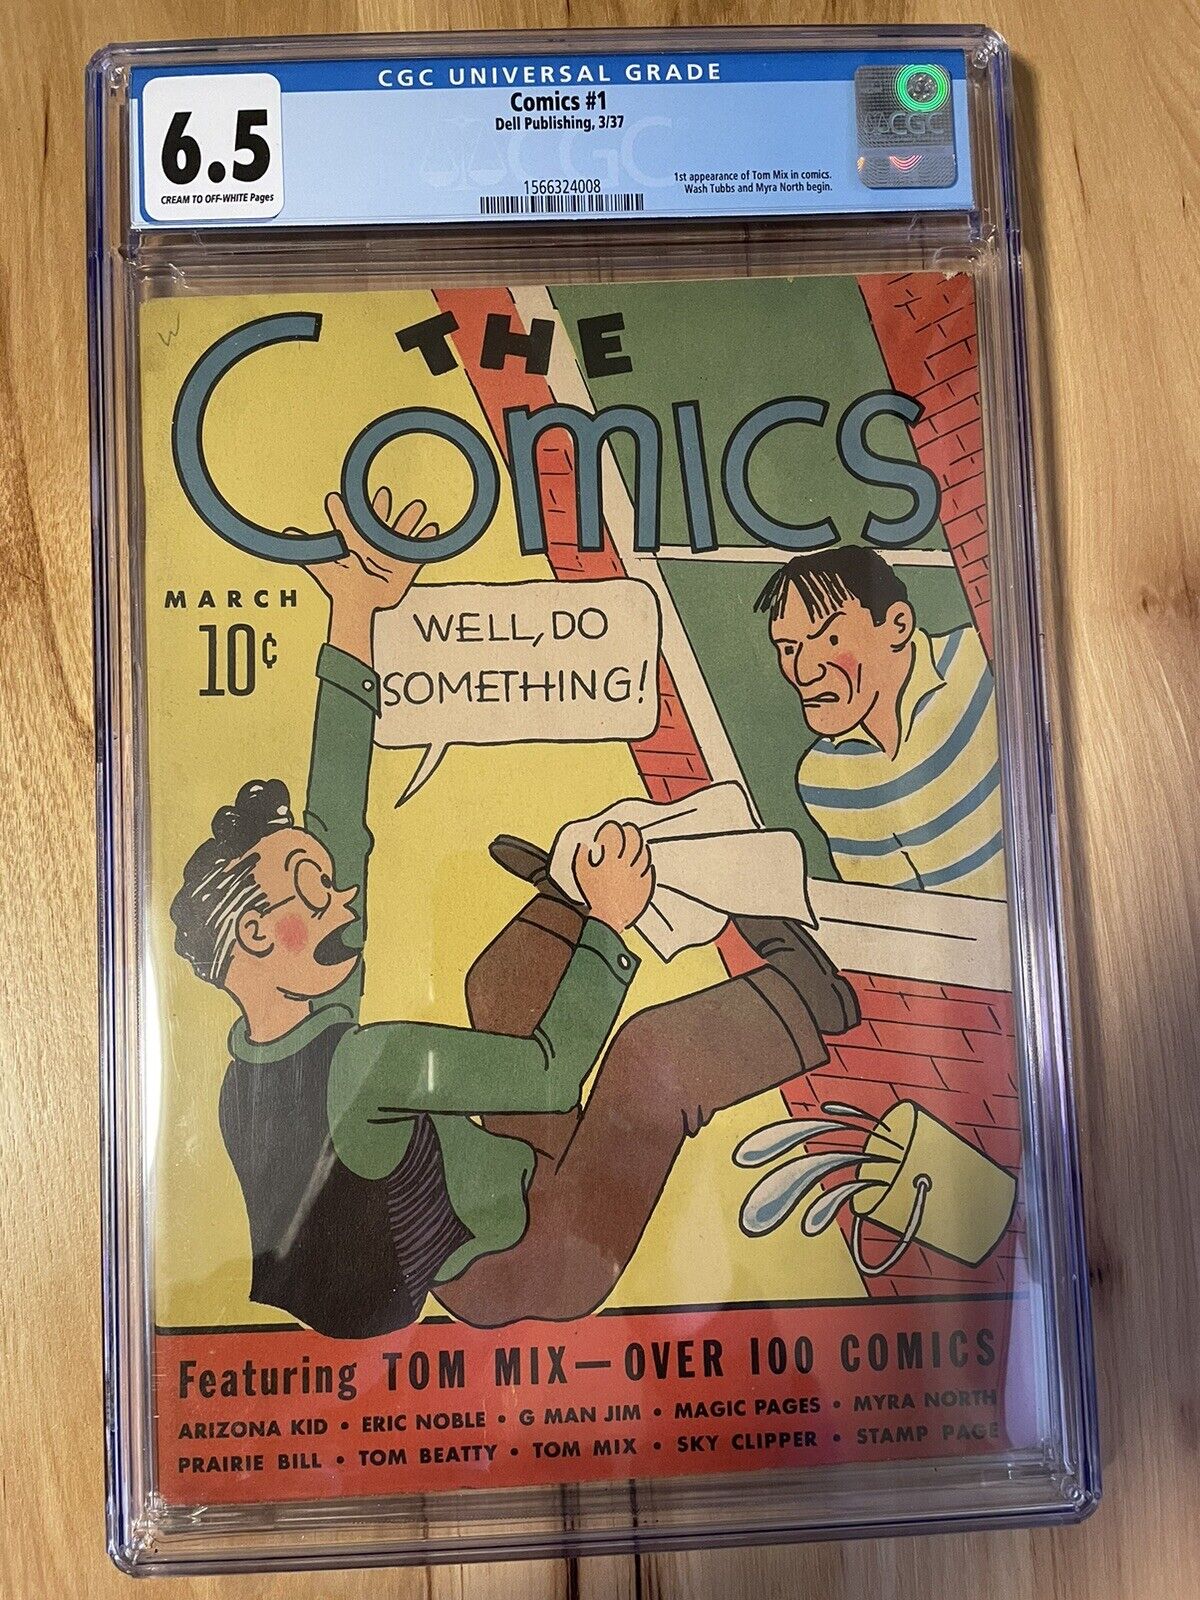 The Comics #1 Dell Publishing 1937 Golden Age CGC 6.5 RARE First Tom Mix